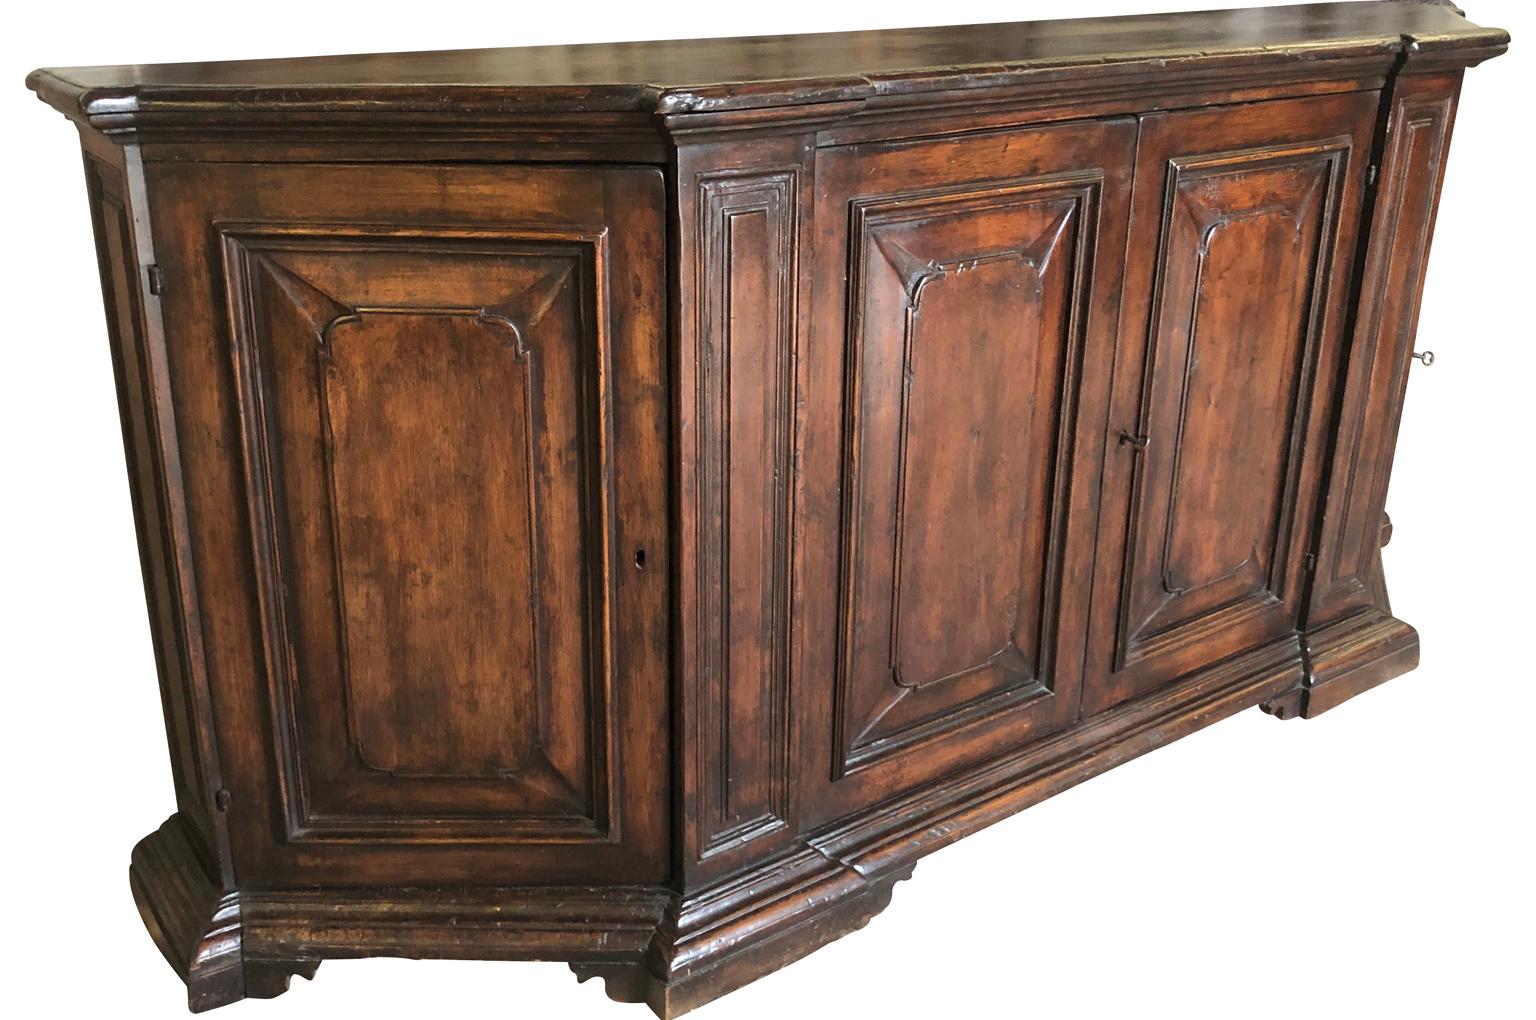 A very handsome mid-19th century credenza from the Veneto region of Italy. Soundly constructed from rich walnut with canted sides and four molded door panels. A wonderful storage piece. Excellent patina.